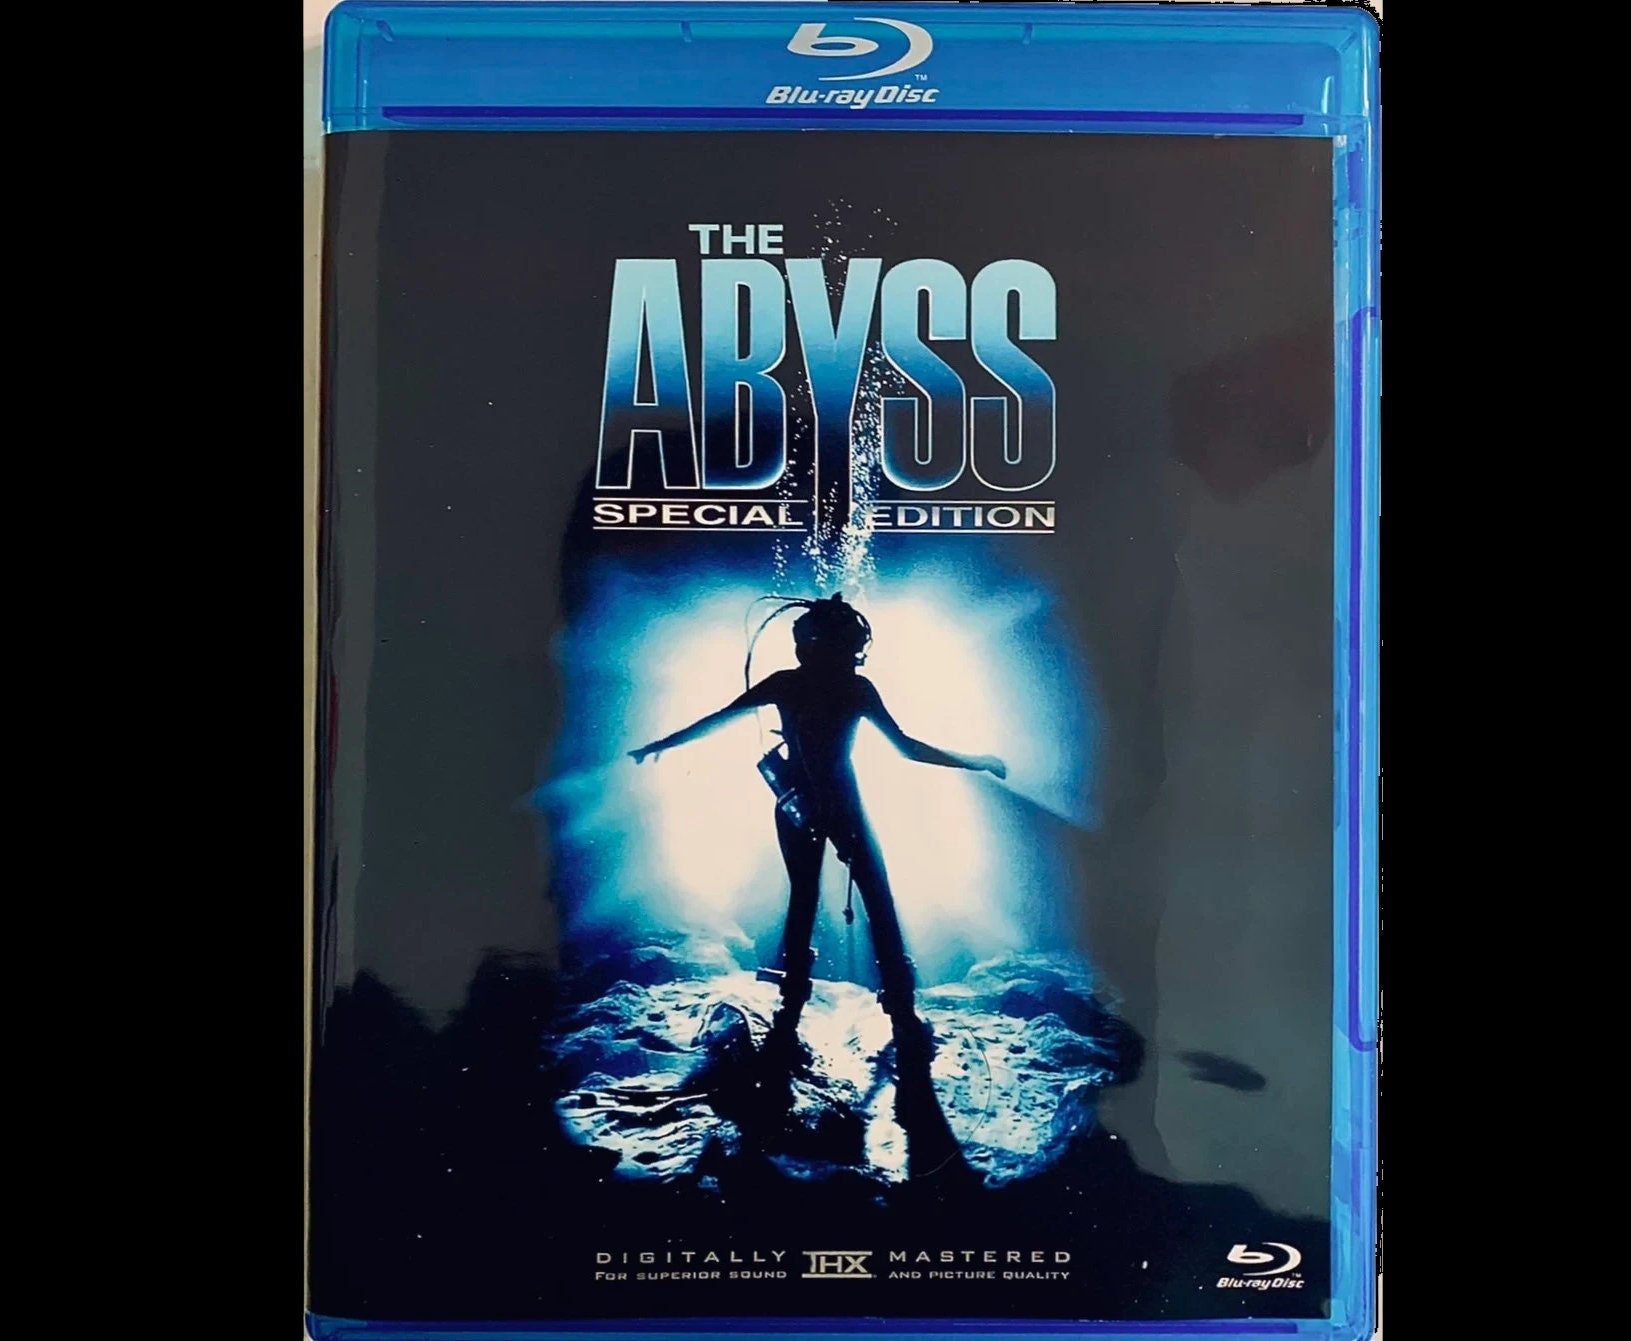 Made in Abyss: Theatrical Collection [Blu-ray] [2 Discs] - Best Buy